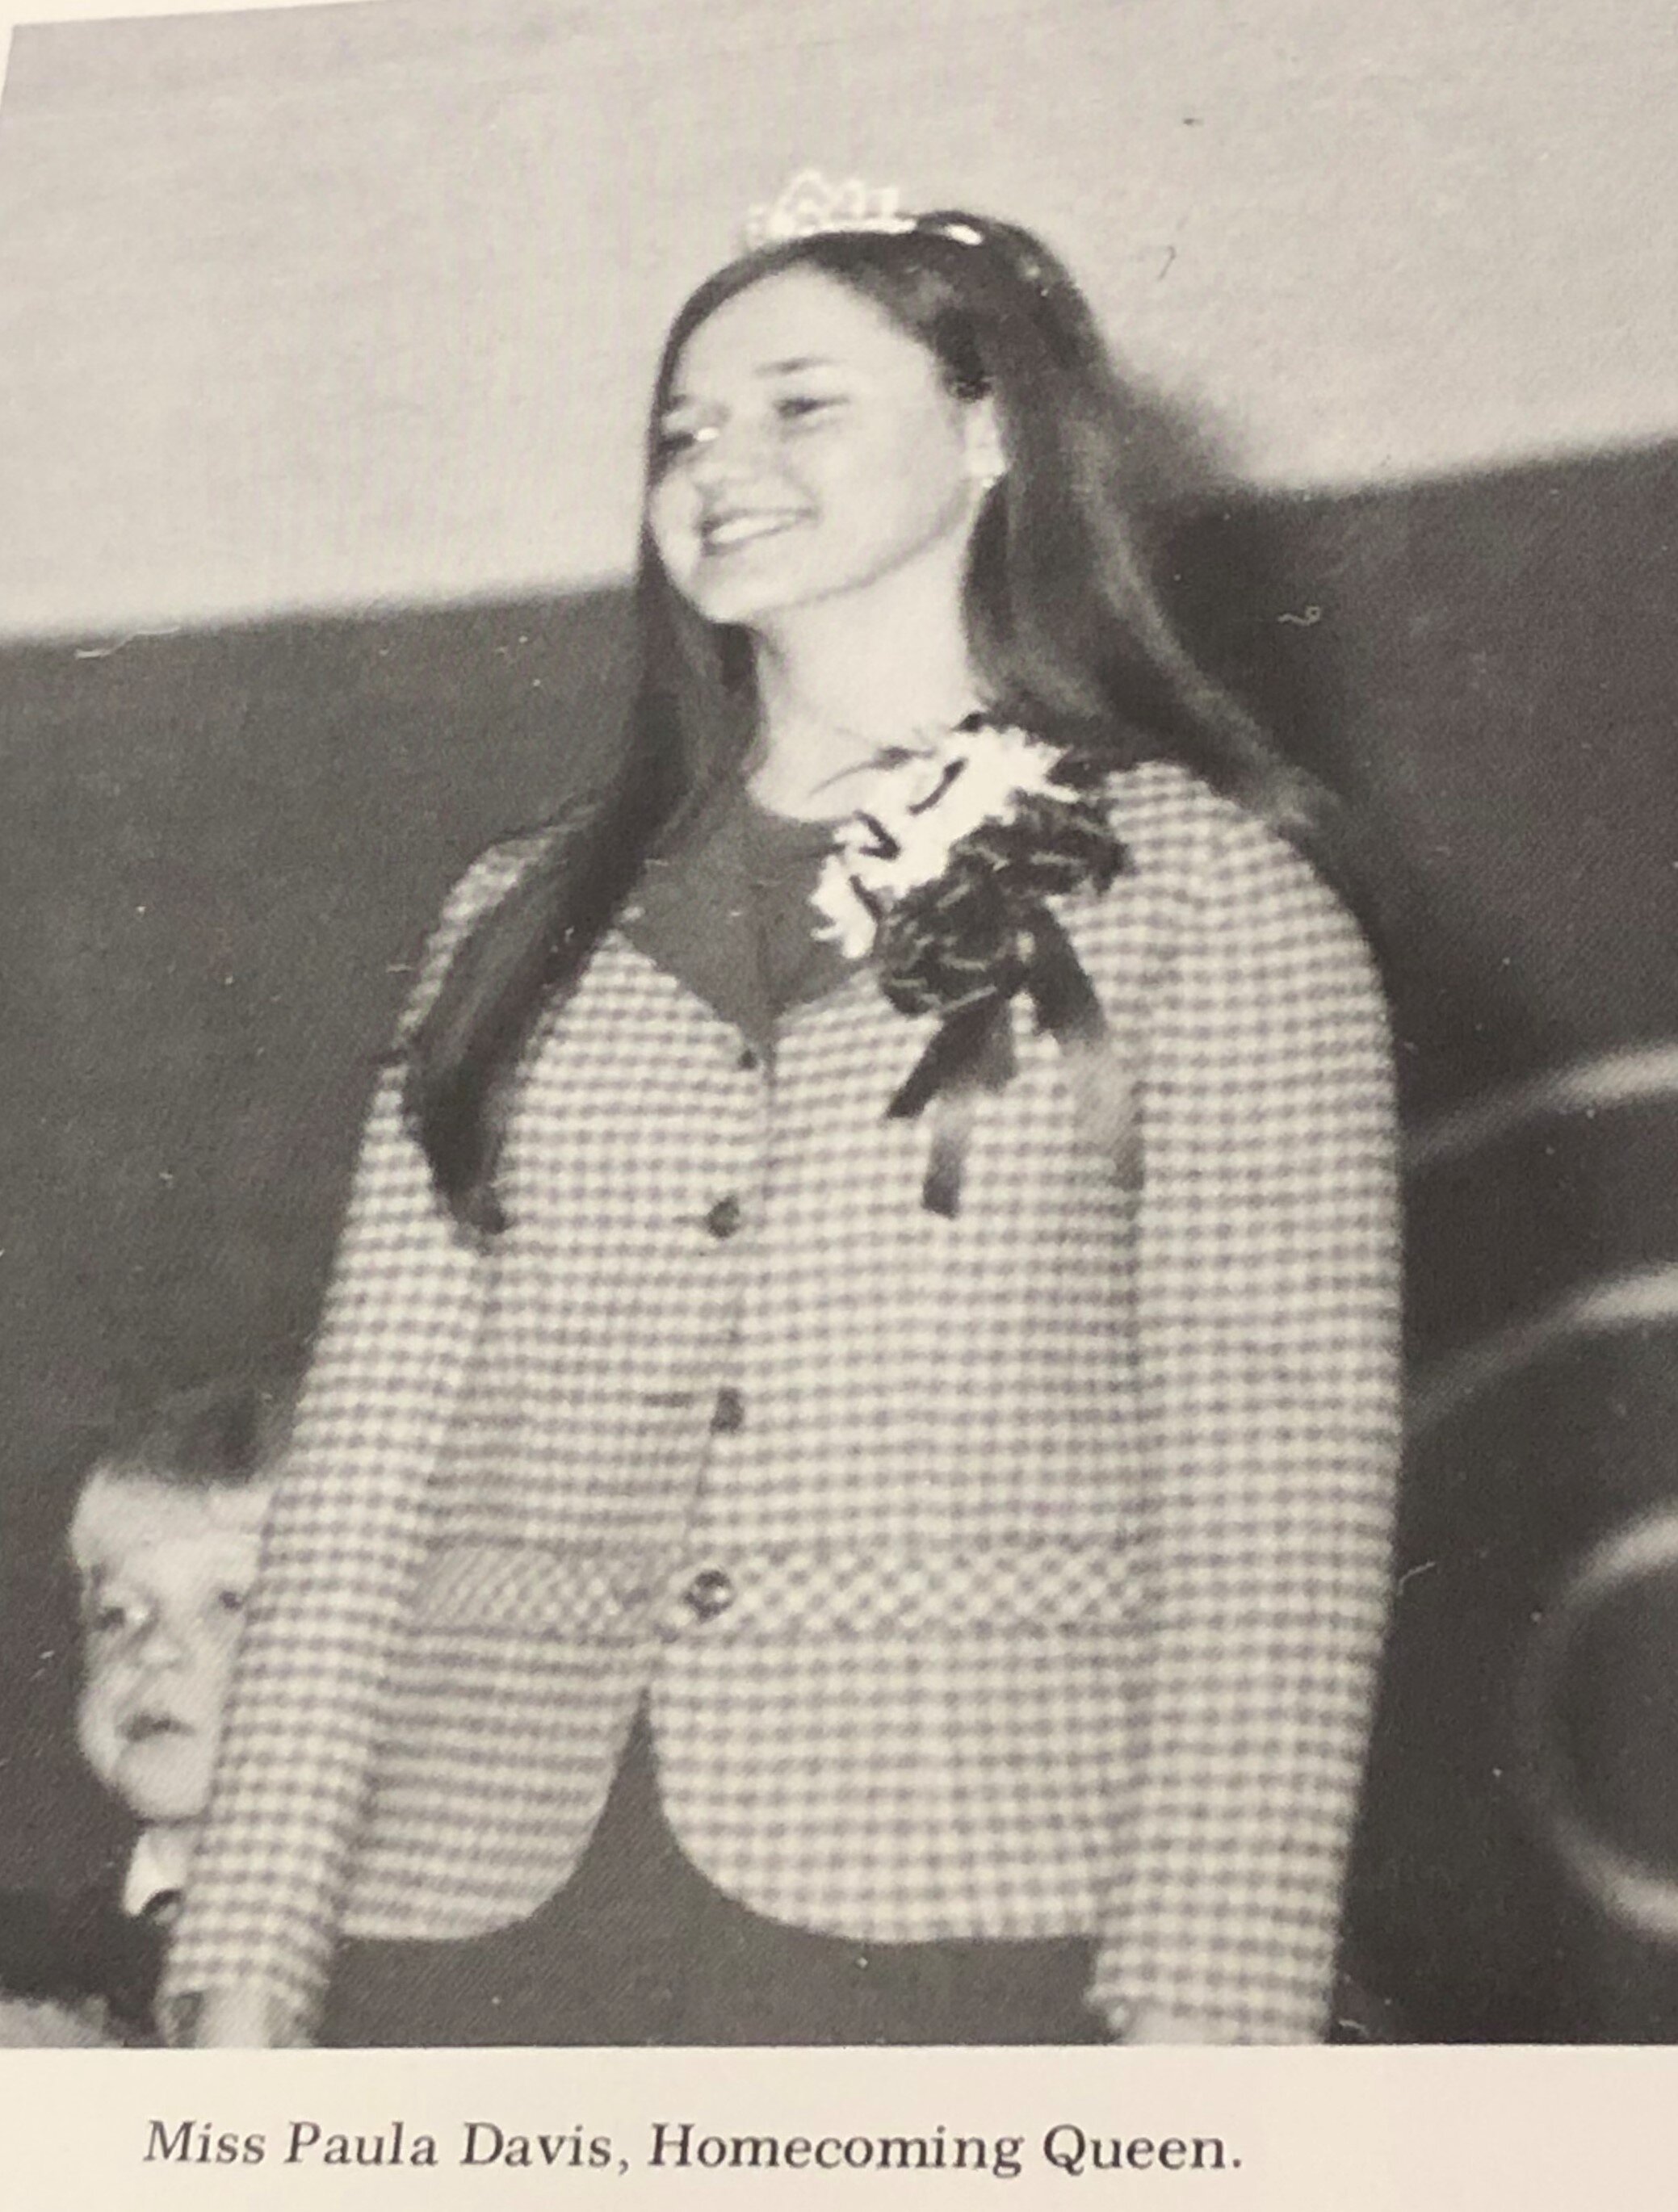 Photo courtesy of North Greenville Archive and the 1979-1980 North Greenville yearbook staff.